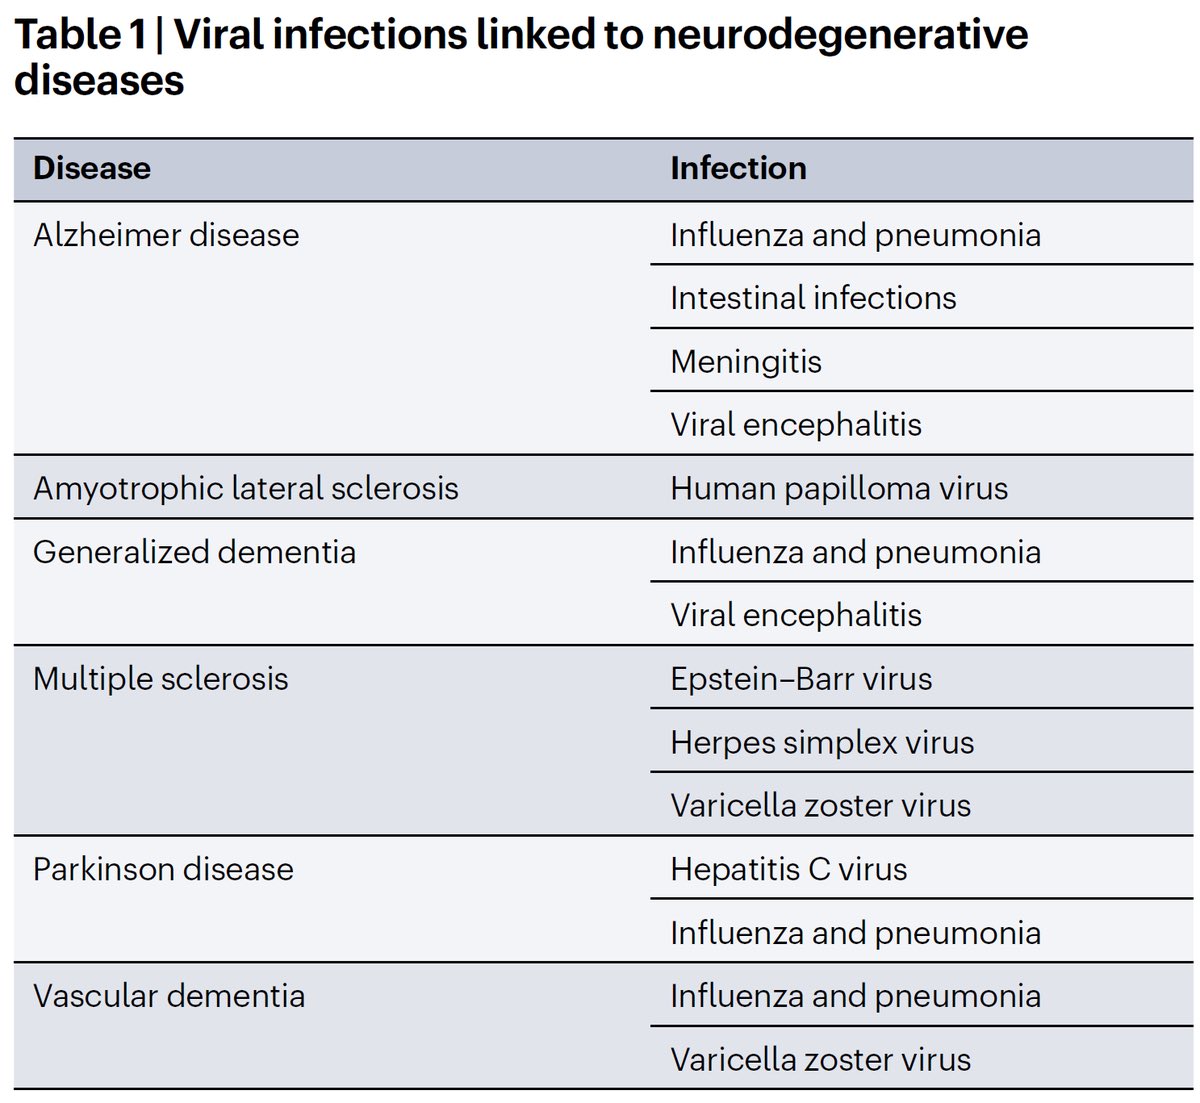 The largest effect association was between viral encephalitis exposure and Alzheimer’s disease. Influenza with pneumonia was significantly associated with five of the six neurodegenerative diseases (NDDs) studied. 4/